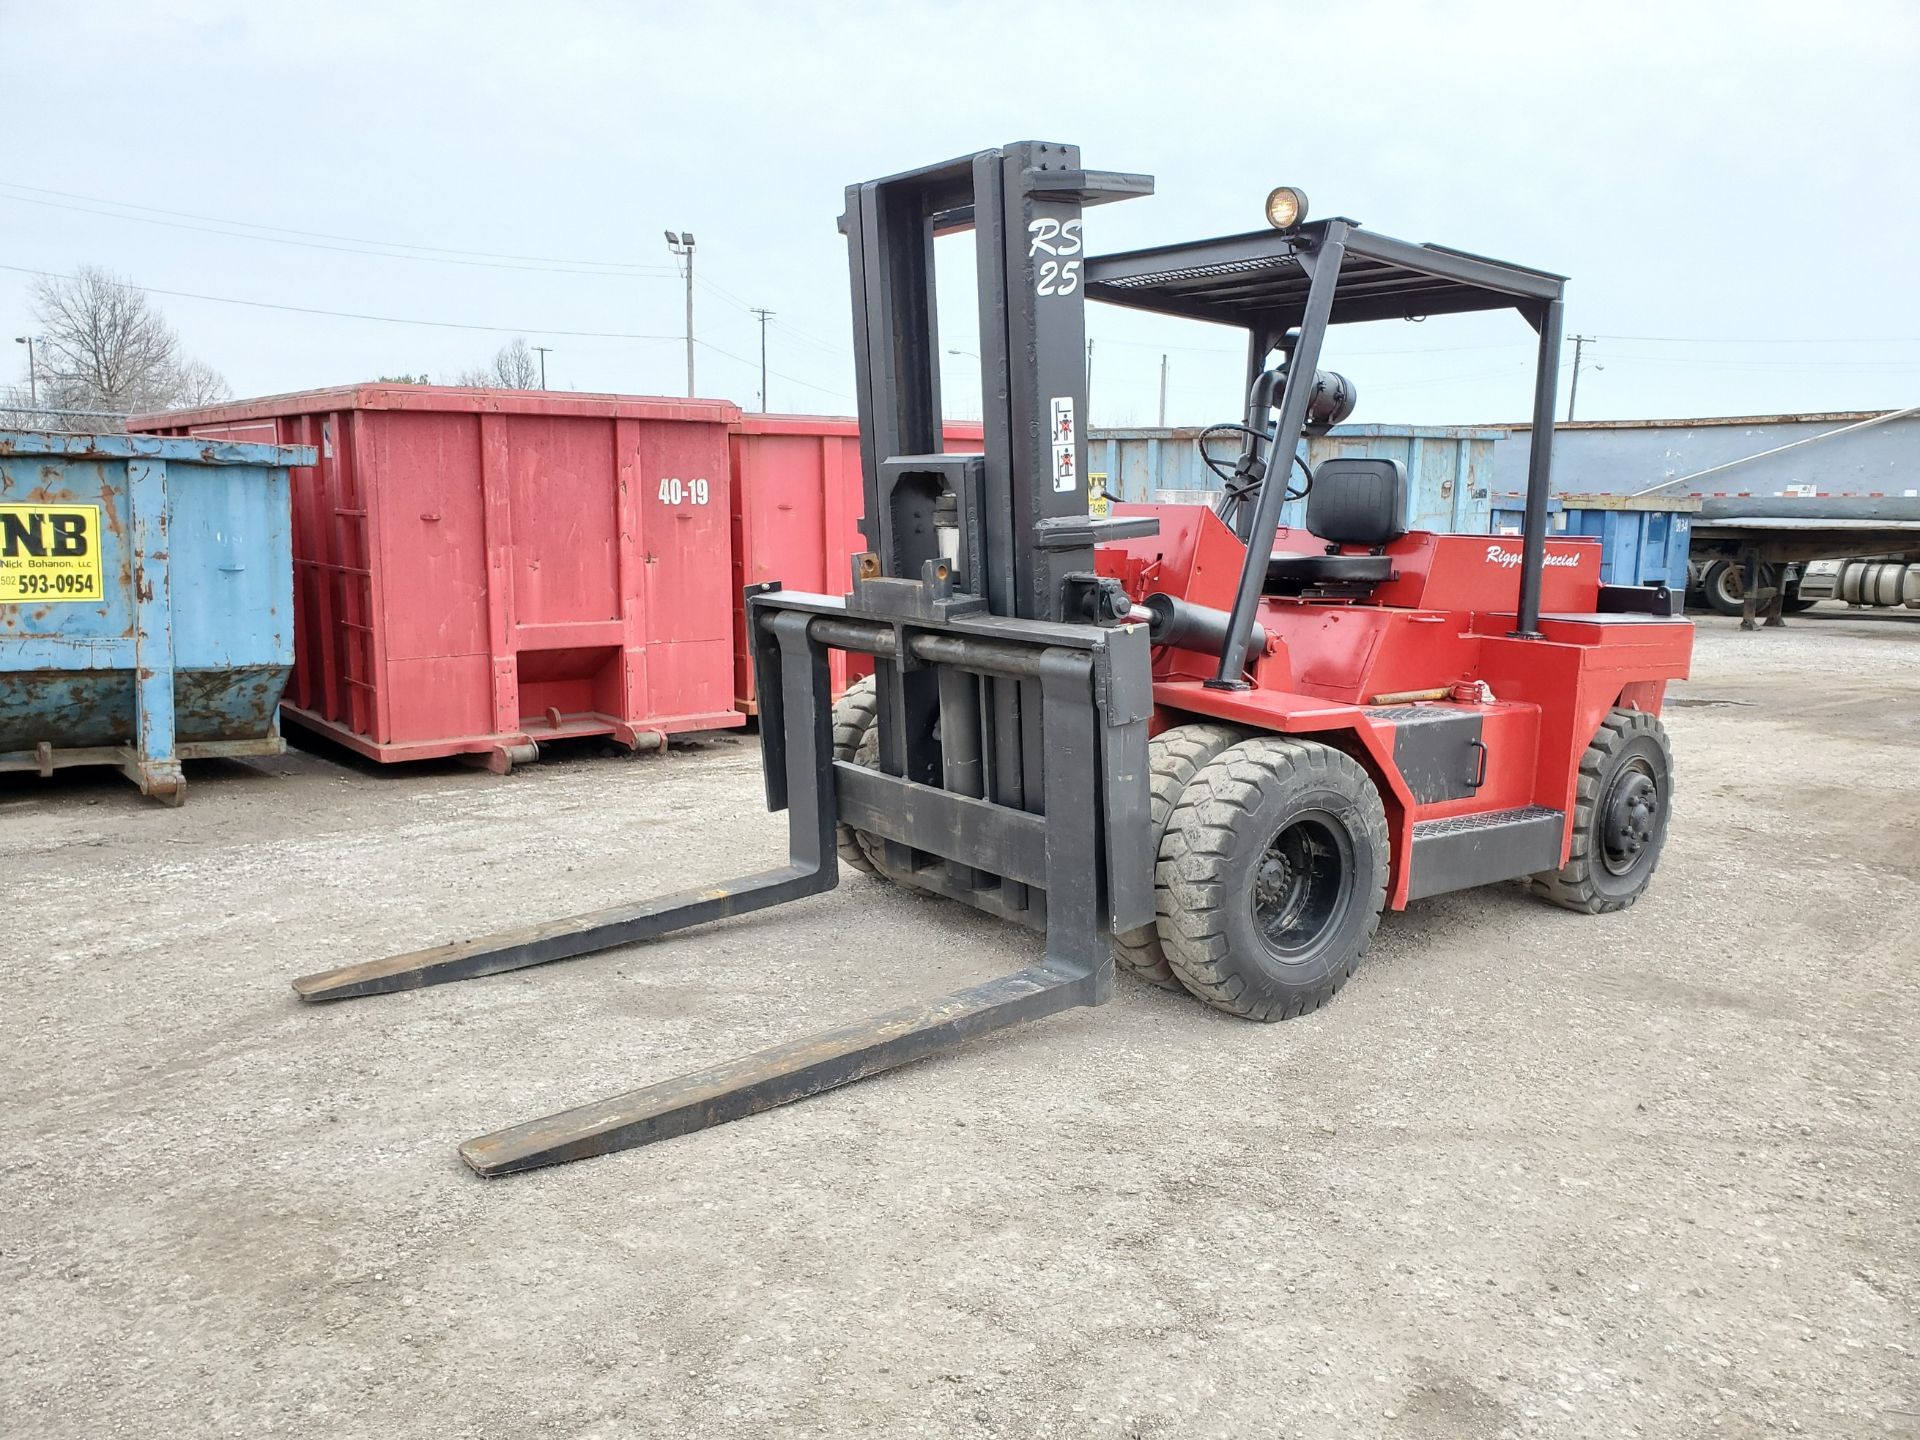 RIGGERS SPECIAL RS25 25,000 LB. CAP. LPG FORKLIFT, DUAL FRONT PNEUMATIC TIRES, 2-STAGE - Image 26 of 26